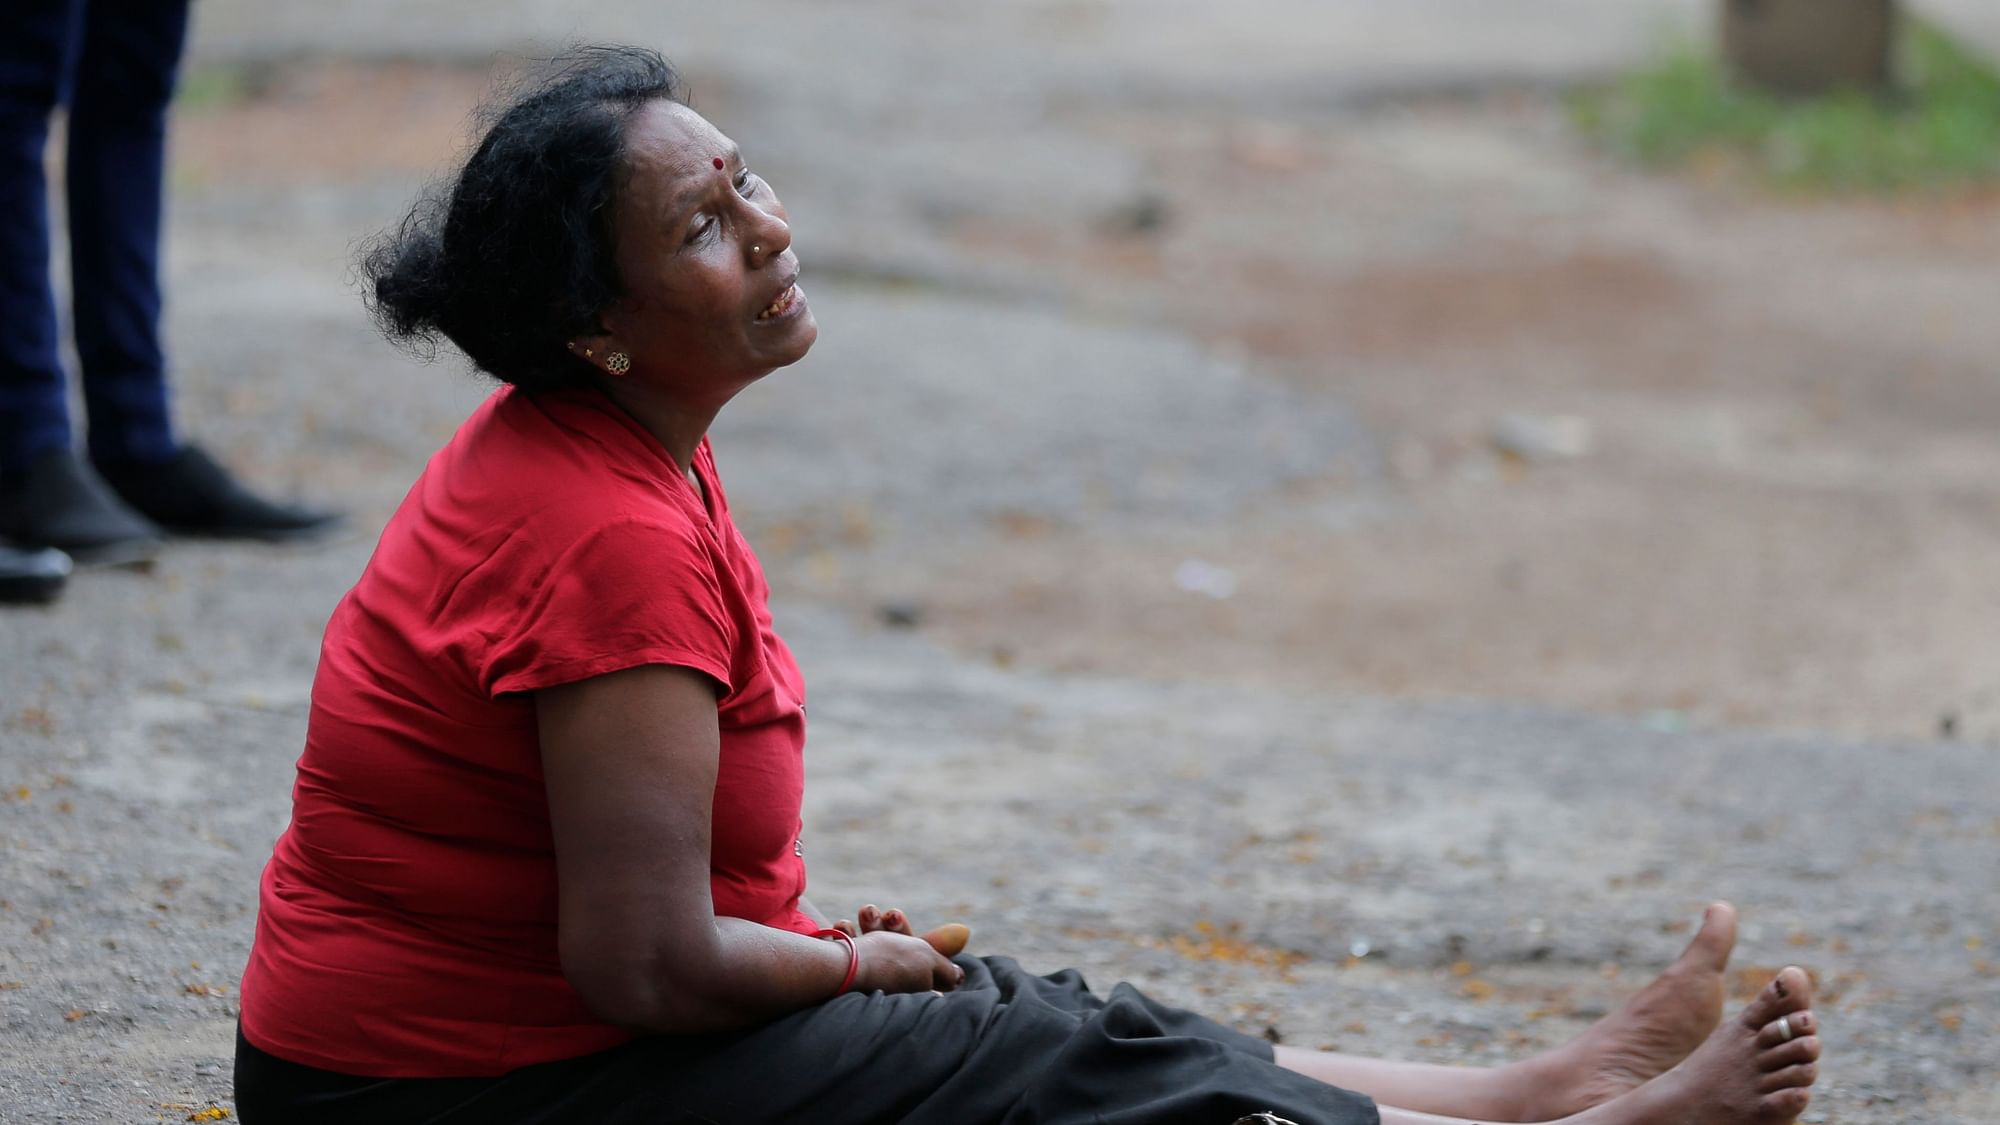 A relative of a blast victim grieves outside a morgue in Colombo, Sri Lanka. More than a hundred were killed and hundreds more hospitalised with injuries from eight blasts that rocked churches and hotels in and just outside of Sri Lanka’s capital on Easter Sunday.